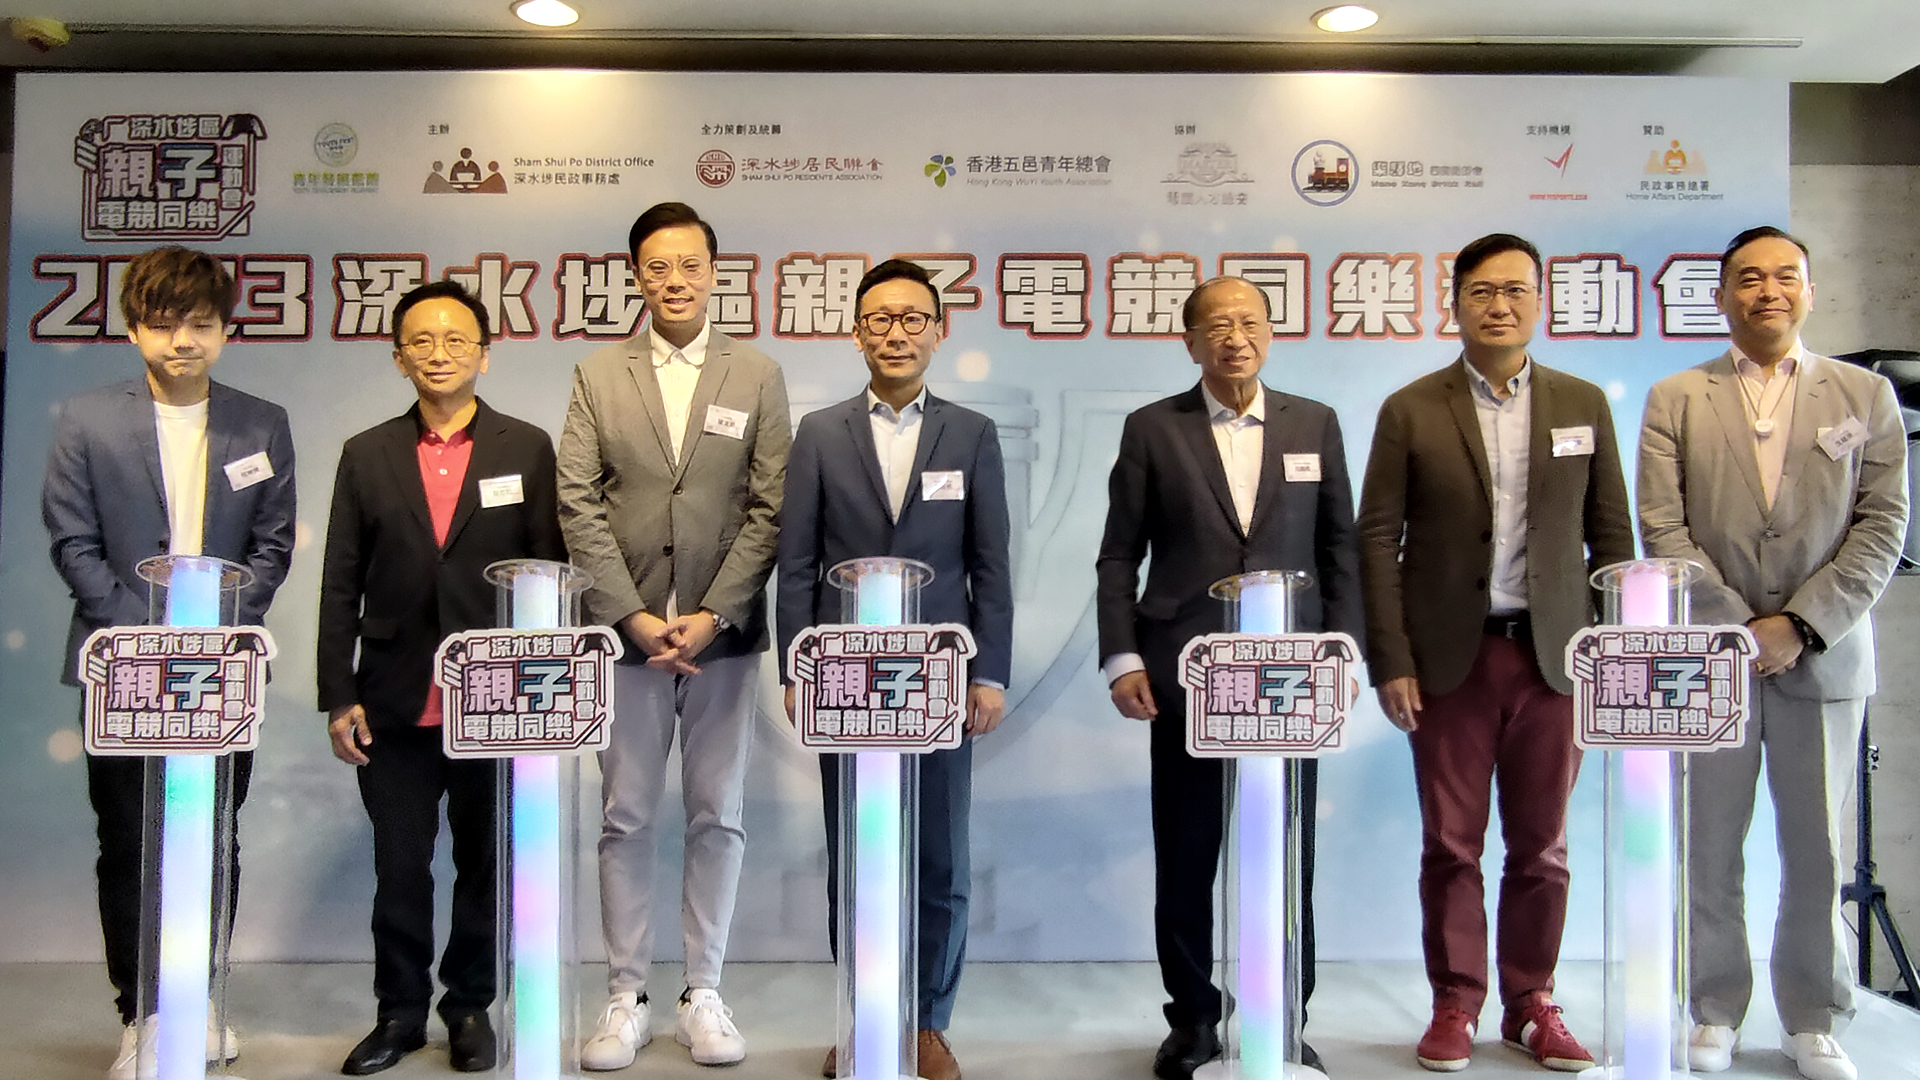 Caption: Kick-off Ceremony with Mr Leung Man Kwong, MH, Legislative Council Member (3rd from left), Mr Pui Kwan-kay, SBS, MH, President of The Football Association of Hong Kong, China (3rd from right), Mr Wong Yan Yin, JP, Sham Shui Po District Officer (4th from left), Mr. Chan Wai Ming, BBS, MH, JP, Chairman of Sham Shui Po Residents Association (2nd from left), Mr. Wong Tat Tung, MH, JP, Founder of Hong Kong WuYi Youth Association(2nd from right), Mr. Timothy Shen, Convener of Yesports Master Club (1st from right), Mr Ho Kwan-chau, Sham Shui Po DC Members and Event Convener (1st from left).